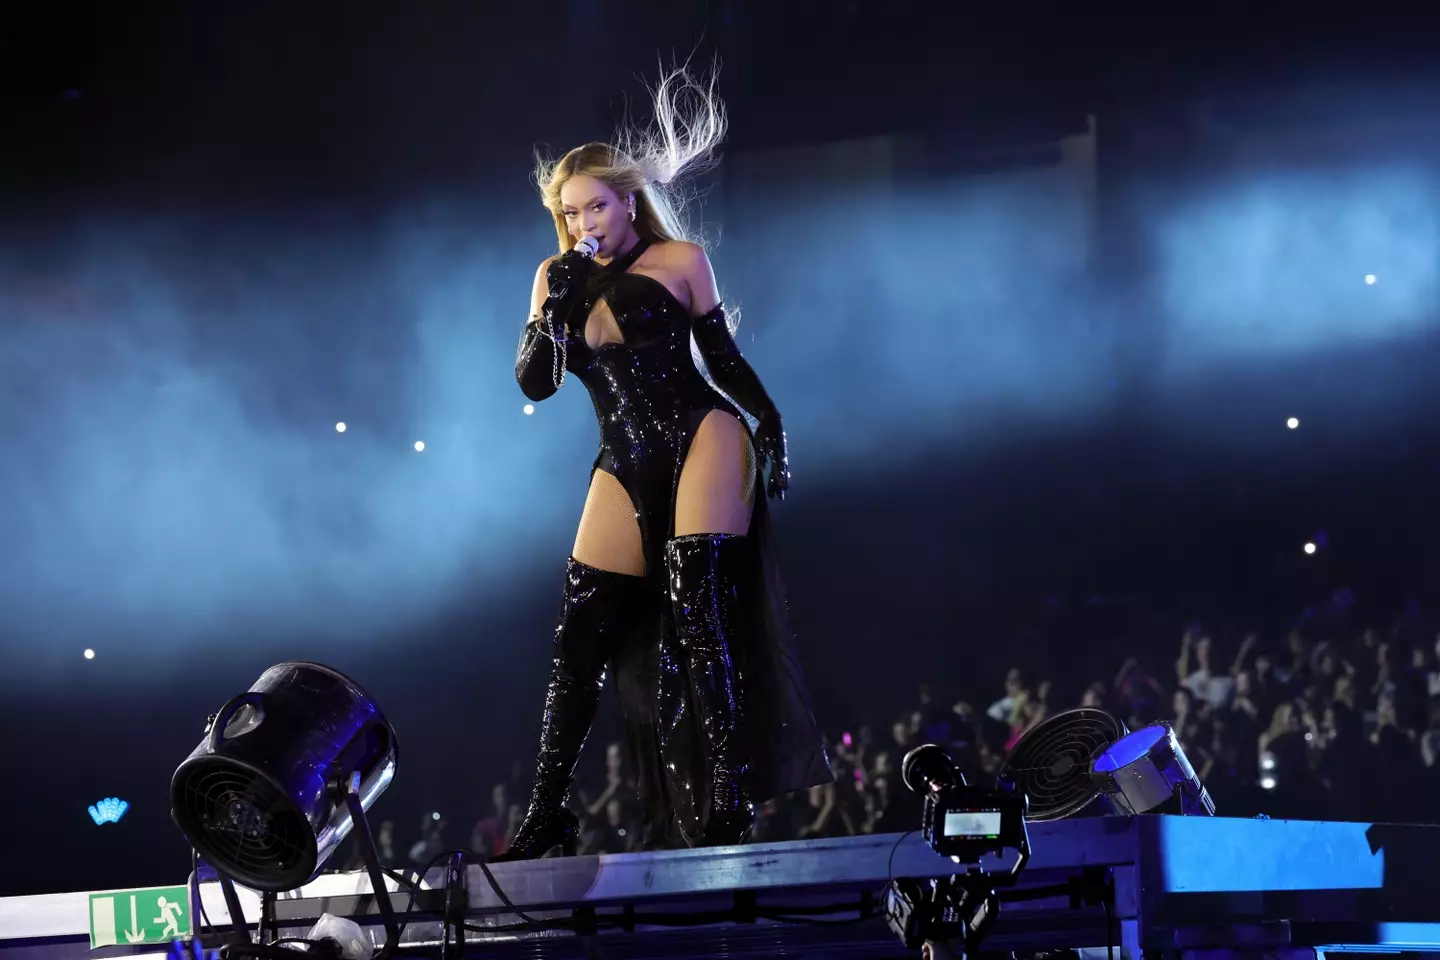 Crowds at Beyoncé's Cardiff concert on 17 May were scanned using facial recognition technology.